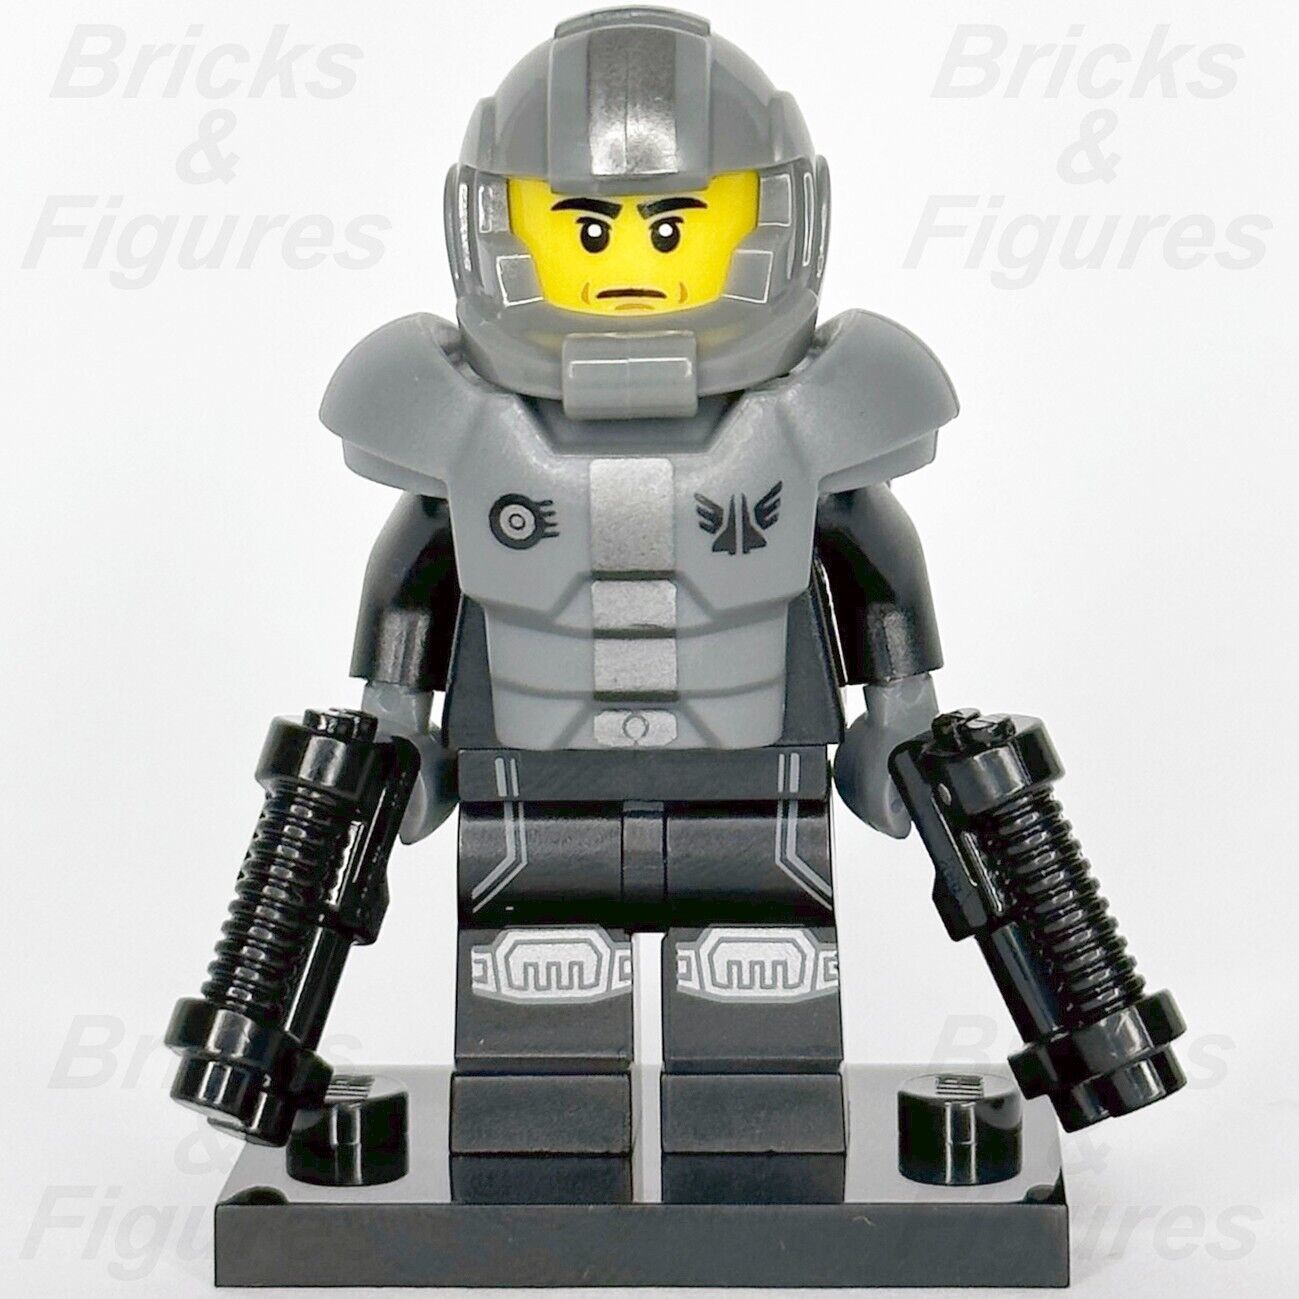 LEGO Galaxy Trooper Minifigure Soldier Collectible Series 13 71008 col13-16 #16 - Bricks & Figures